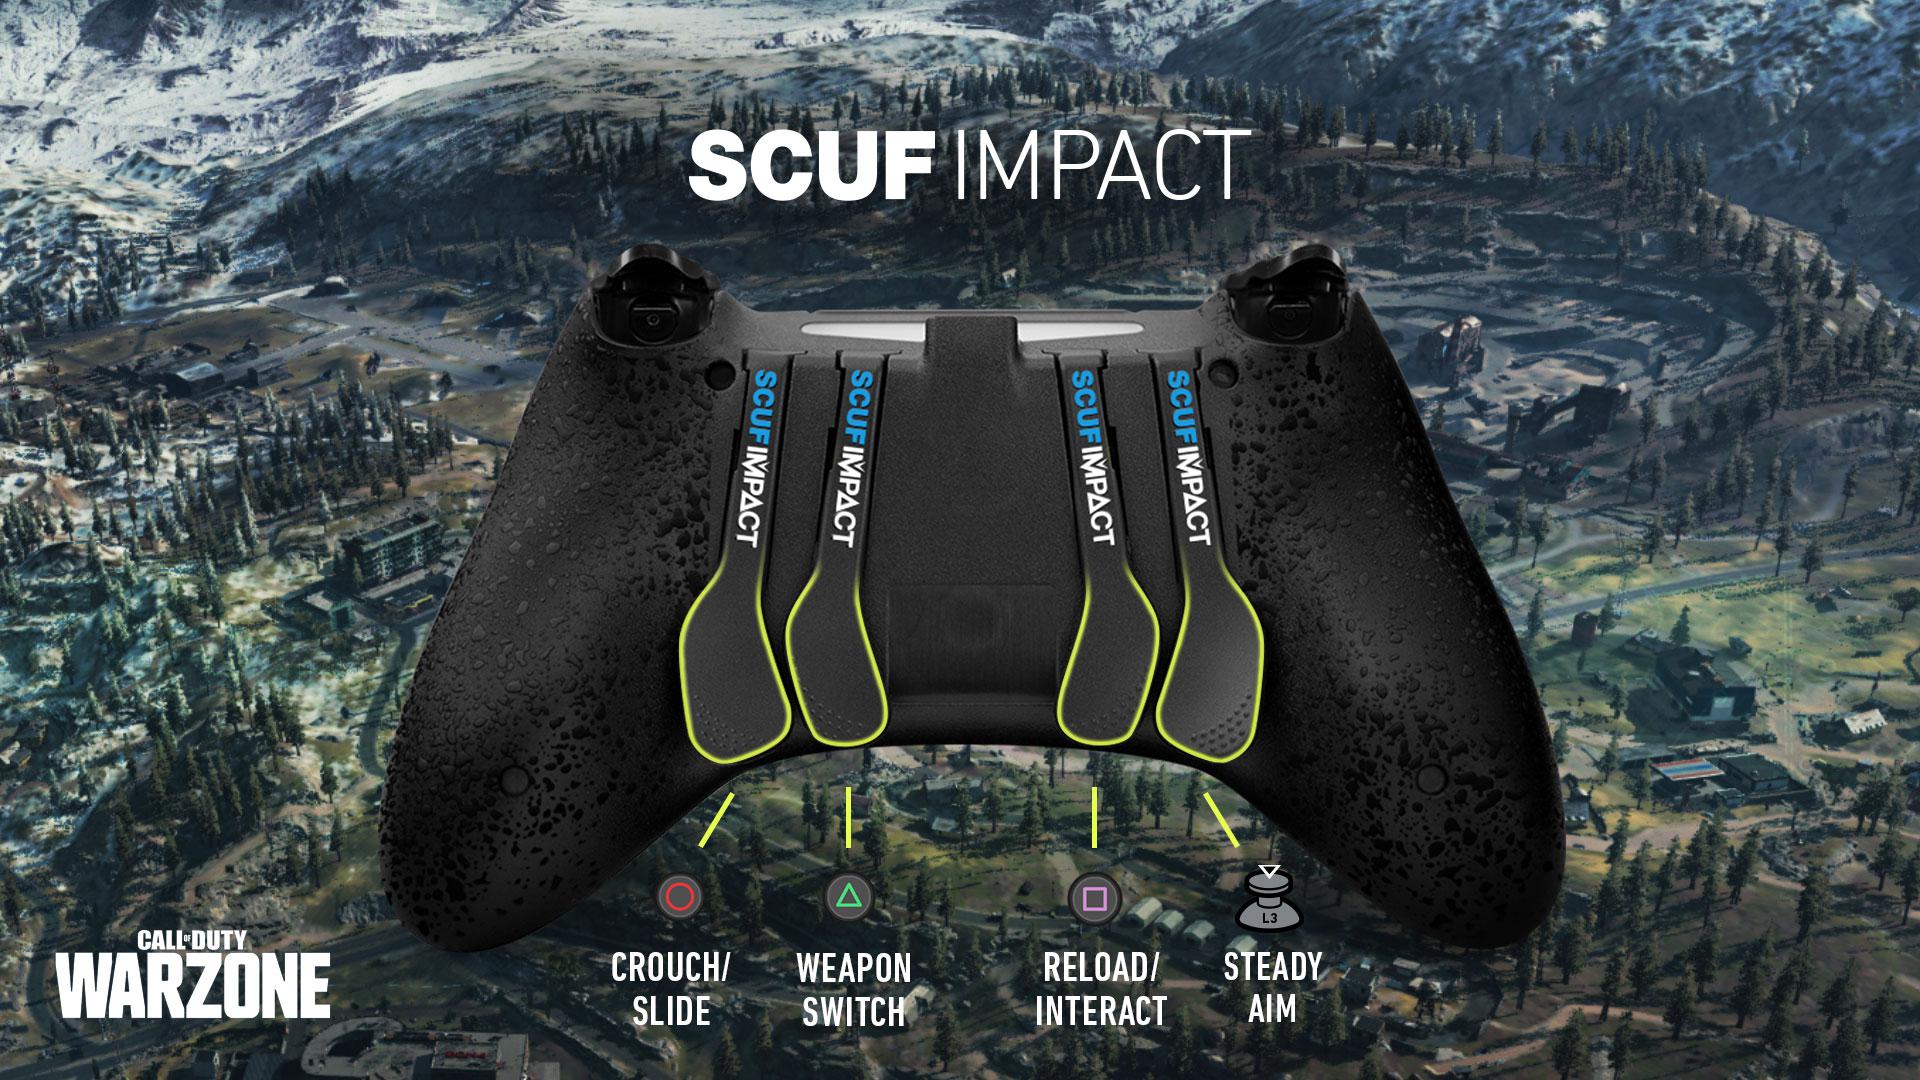 SCUF IMPACT COD Warzone PS4 Controller Setup